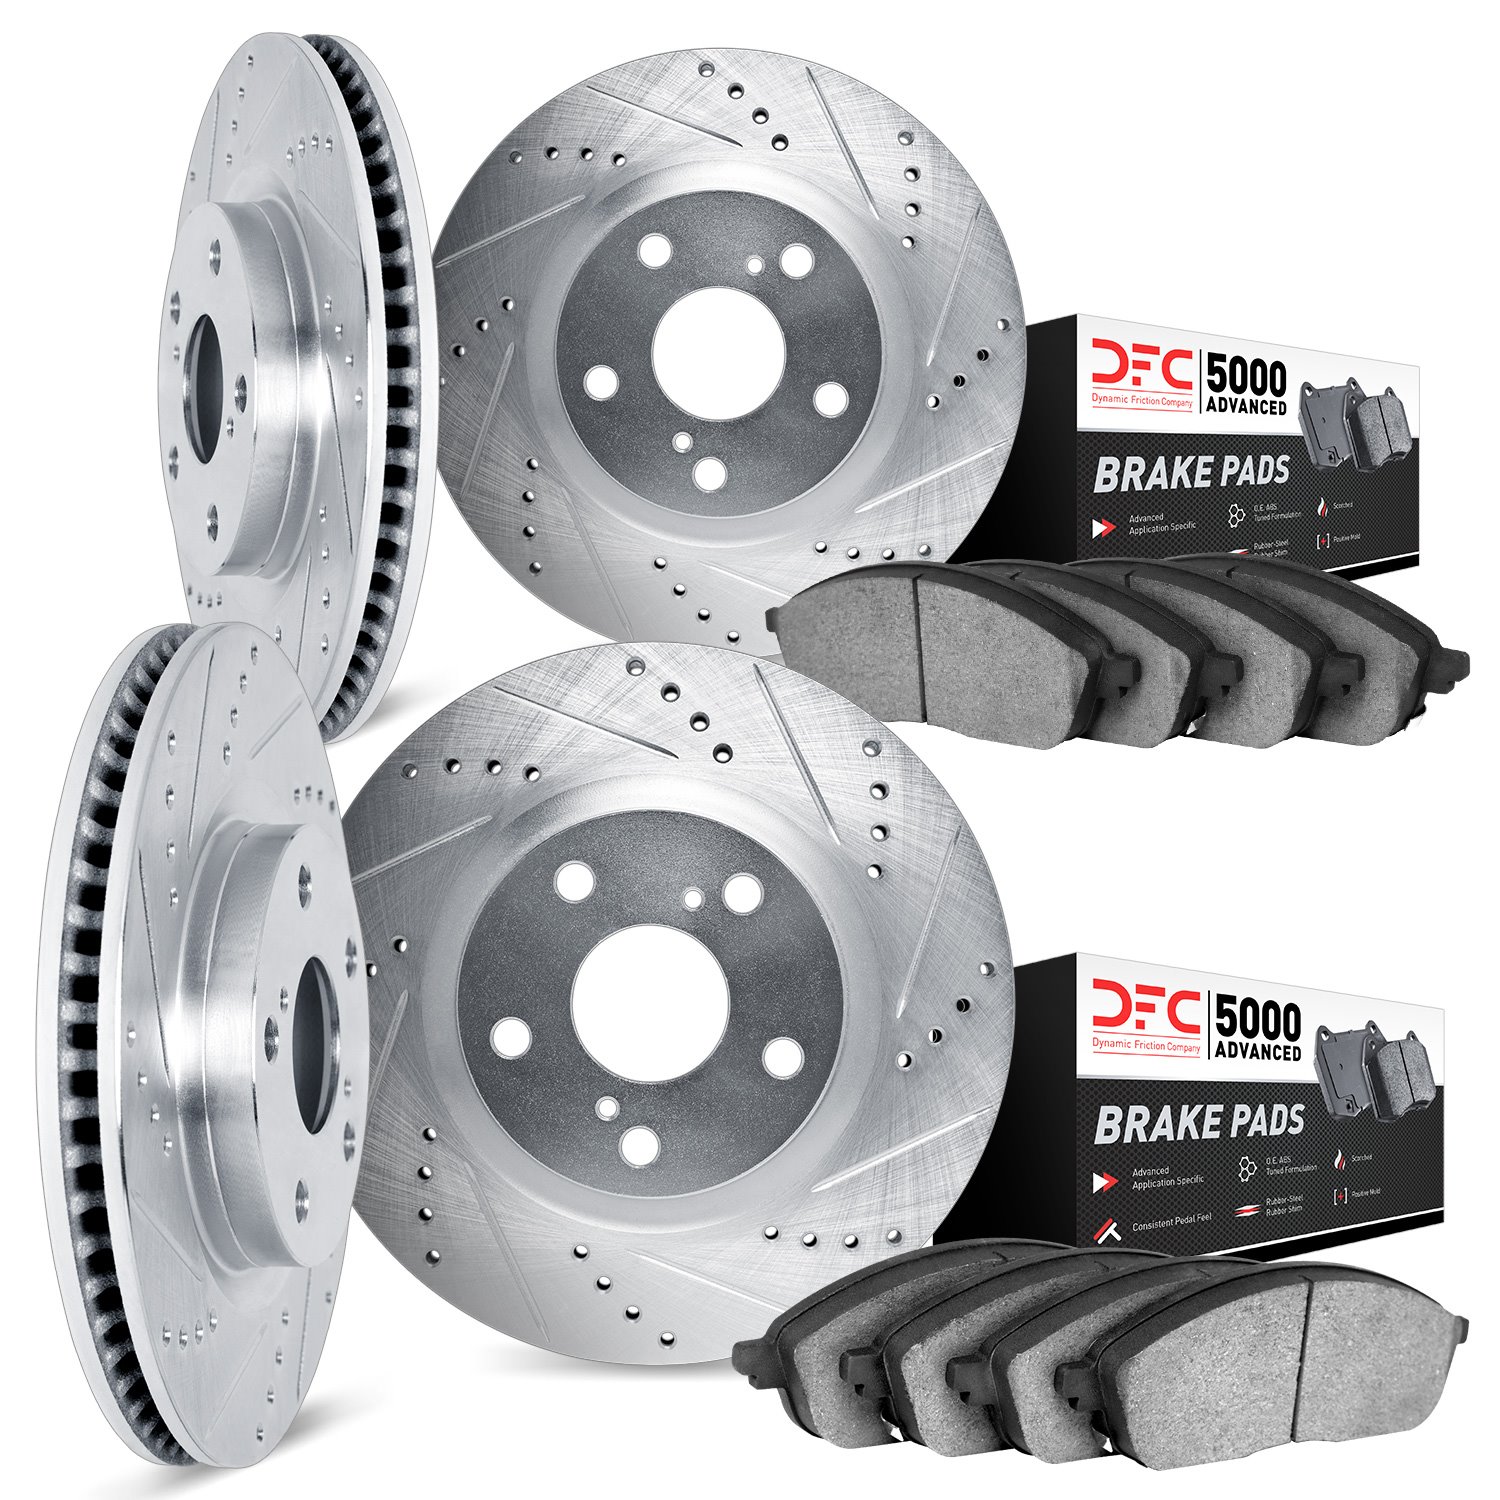 7504-67116 Drilled/Slotted Brake Rotors w/5000 Advanced Brake Pads Kit [Silver], Fits Select Infiniti/Nissan, Position: Front an